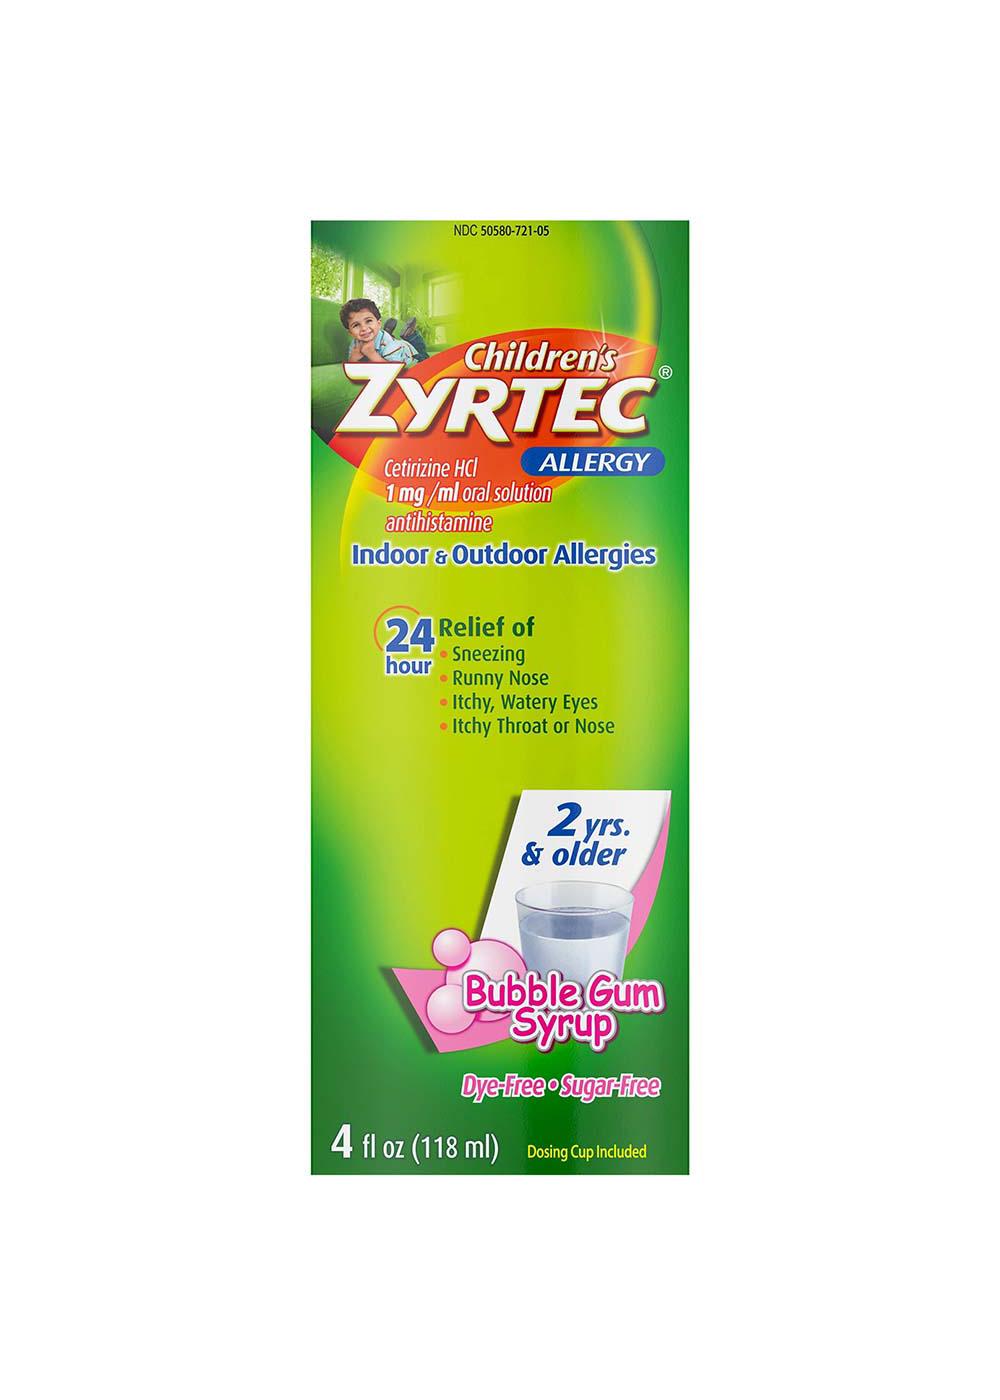 Zyrtec Children's Allergy 24 Hour Relief Syrup - Bubble Gum; image 1 of 2